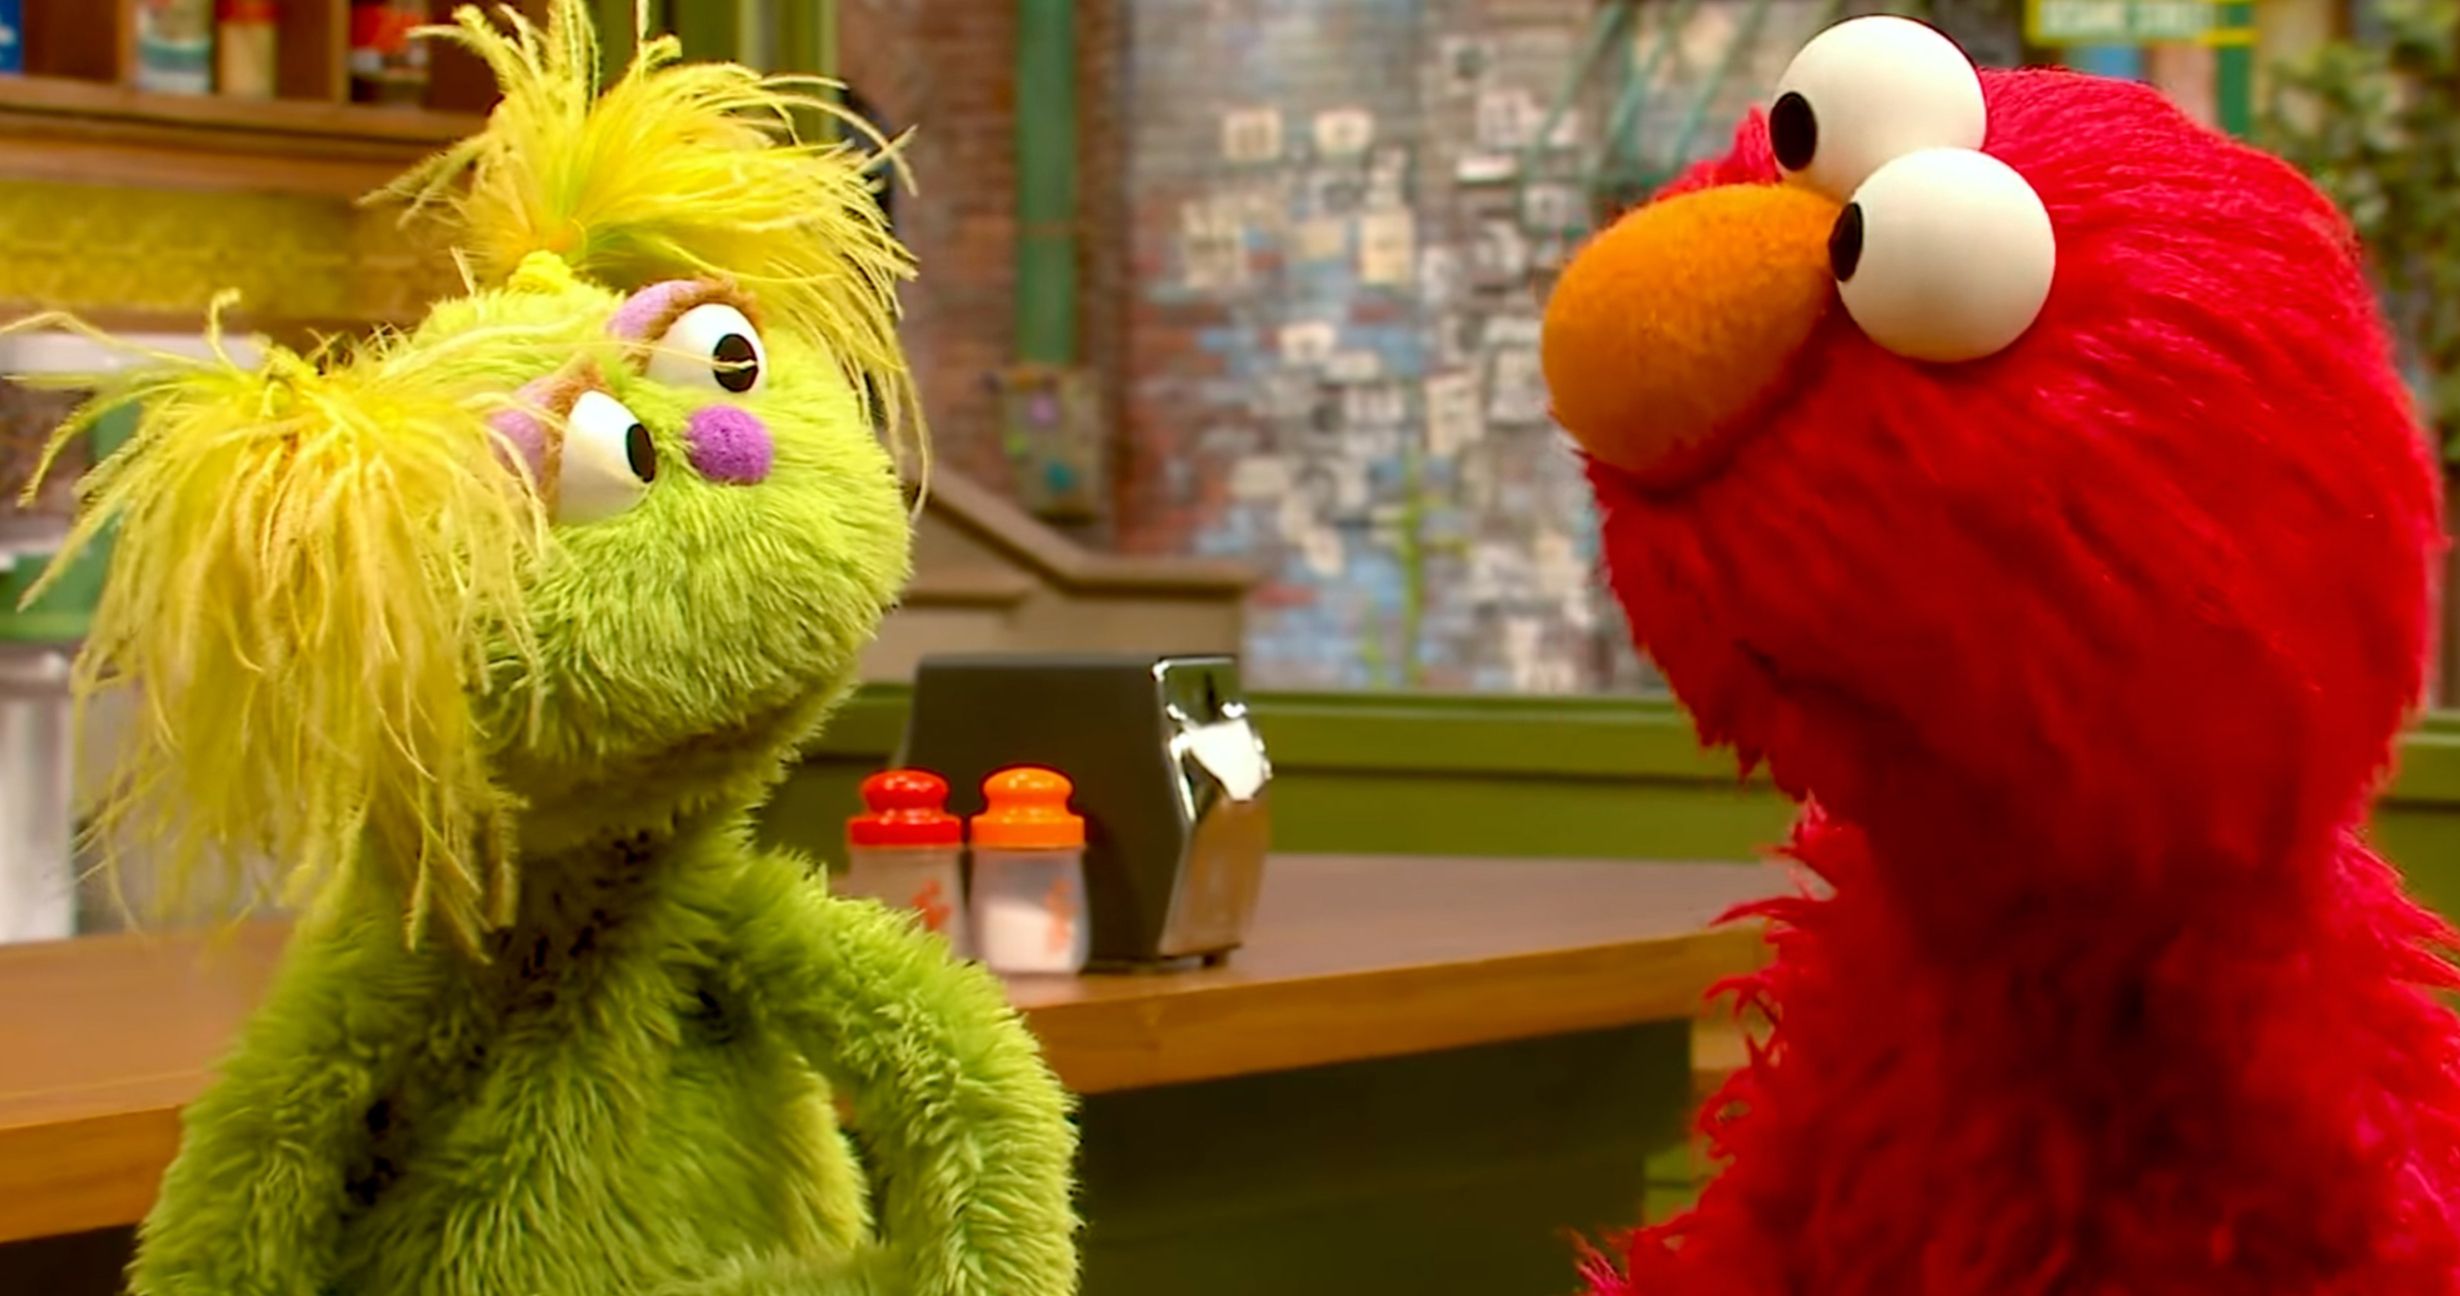 Sesame Street Introduces New Muppet to Take on Opioid Addiction Crisis